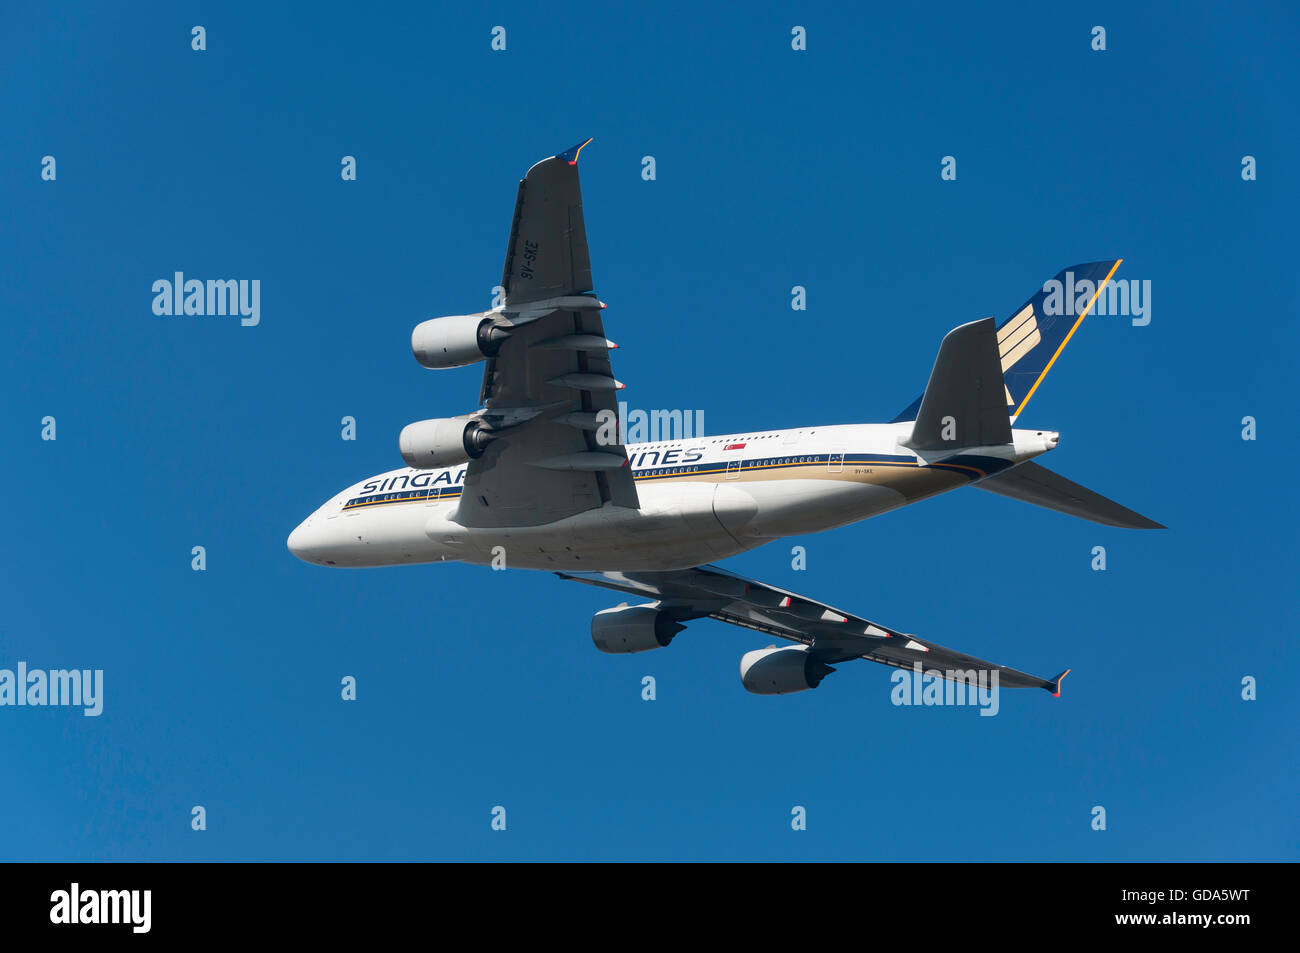 Singapore Airlines Airbus A380 taking off from Heathrow Airport, Greater London, England, United Kingdom Stock Photo